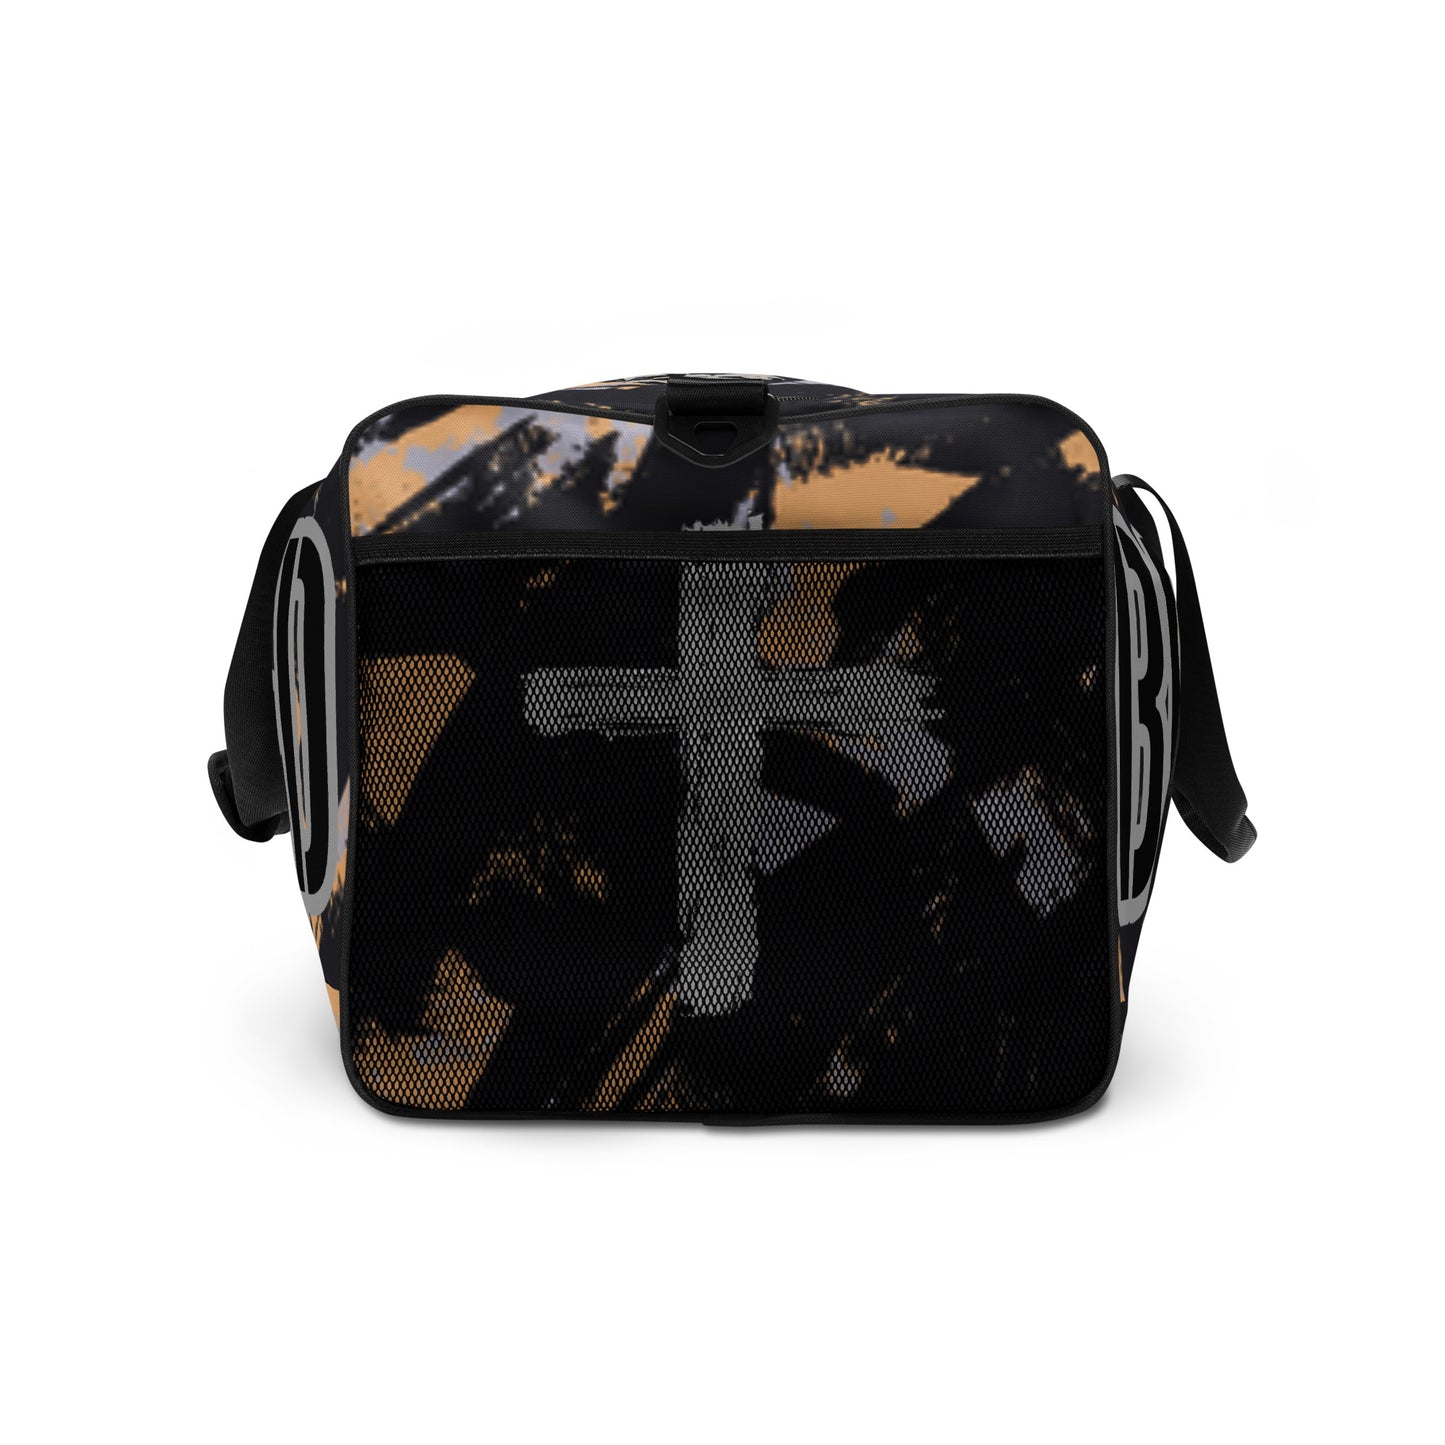 Blessed- Duffle bag